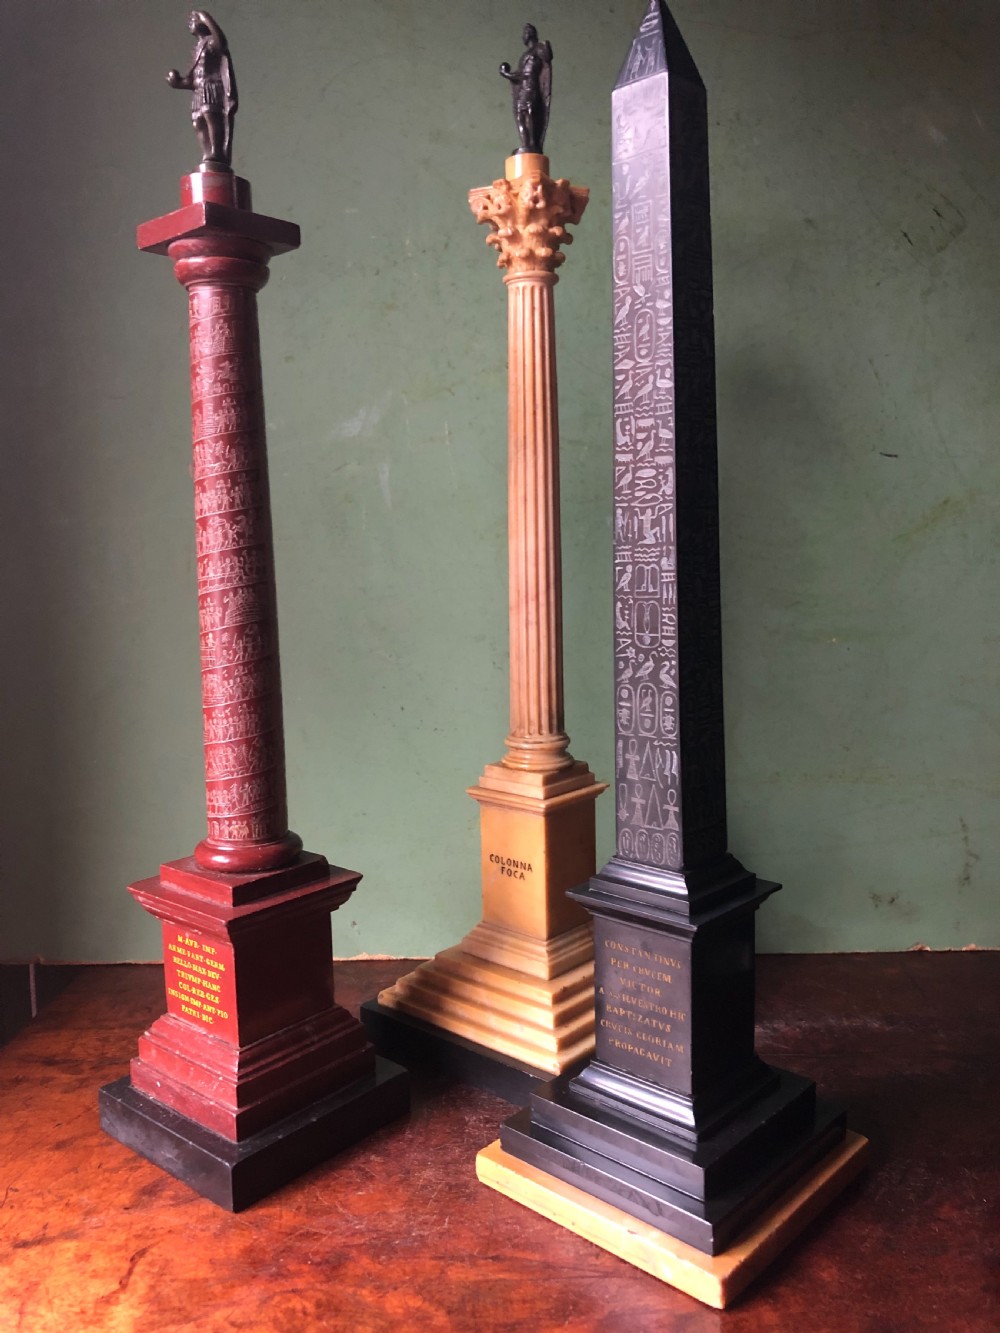 fine quality group of 3 early c19th italian marble grand tour souvenir architectural reduction models from ancient rome